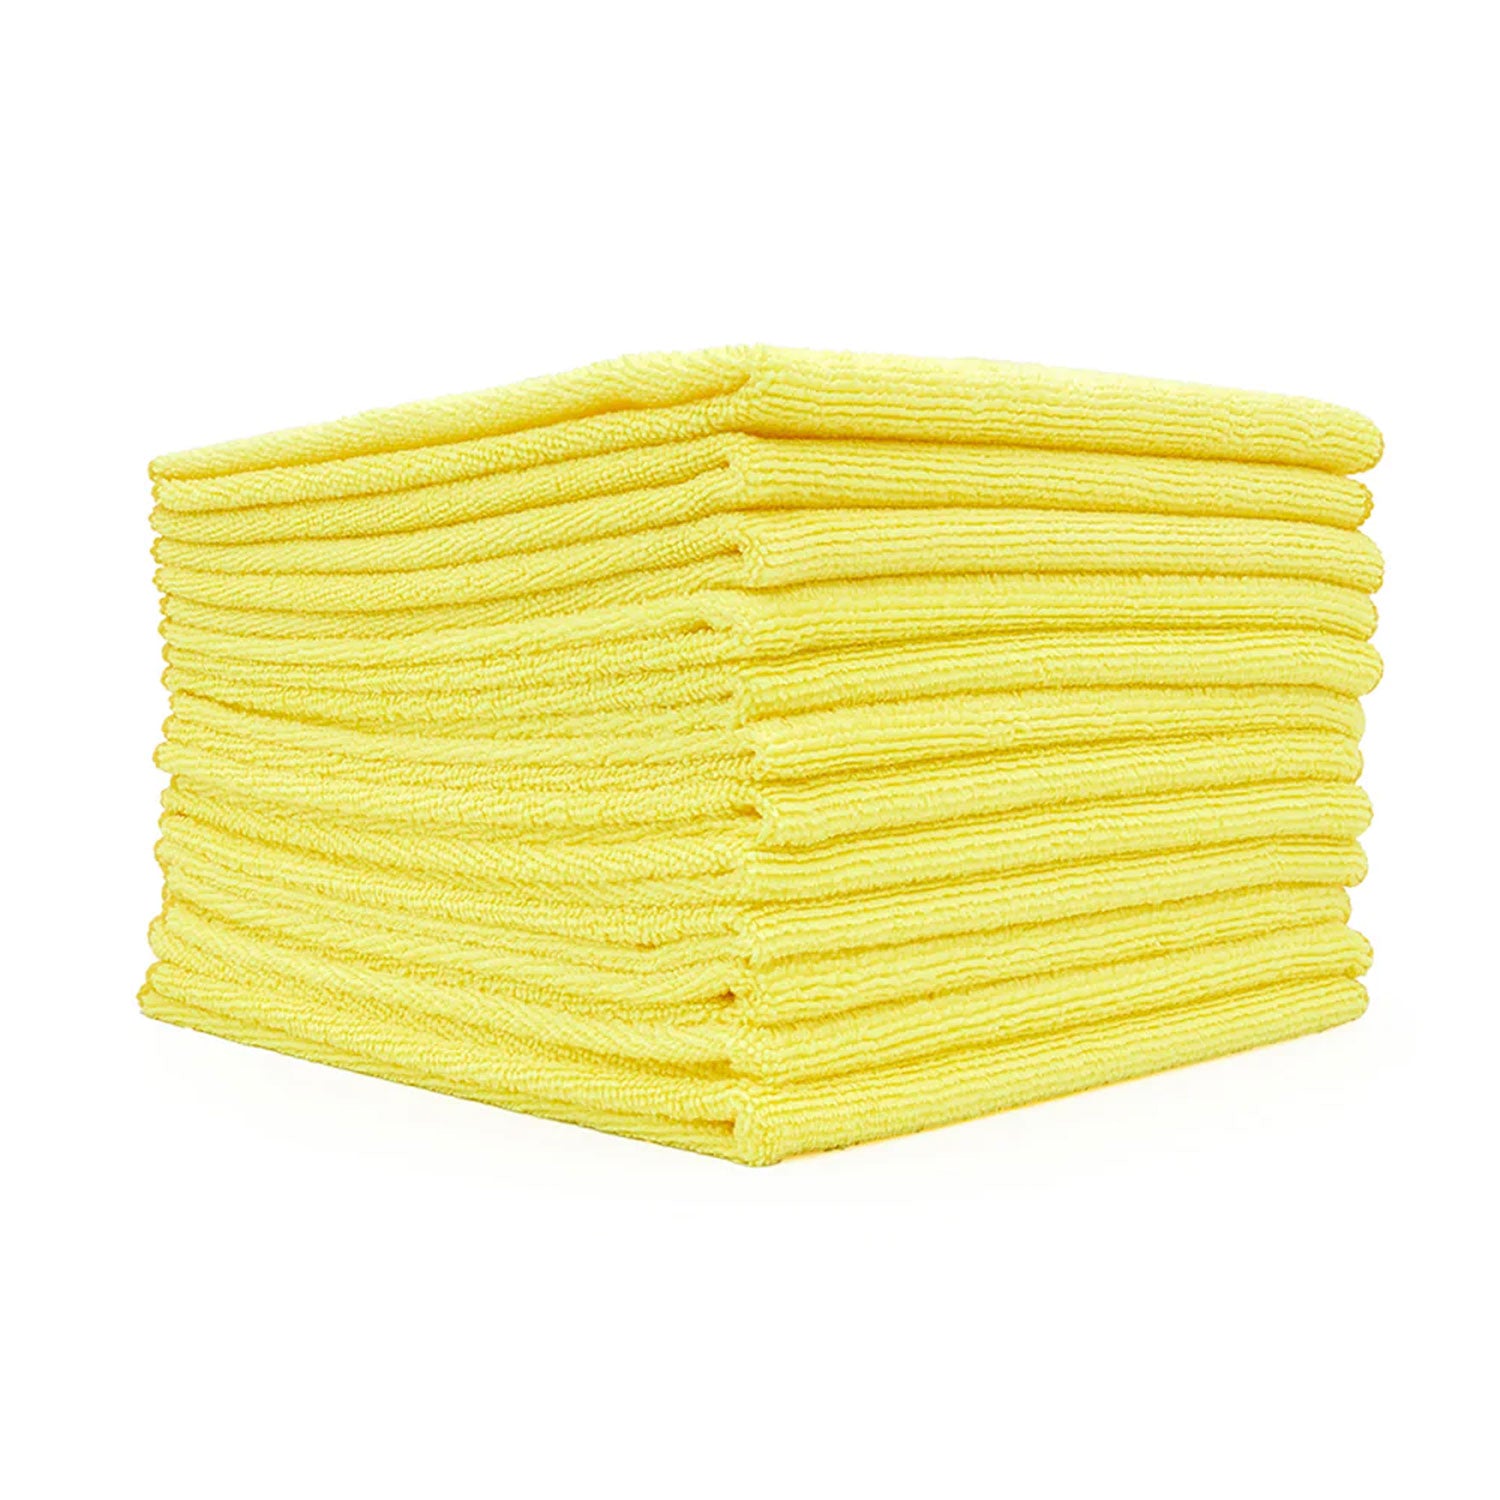 terry-cloth-microfiber-all-purpose-towels-12-pack-yellow